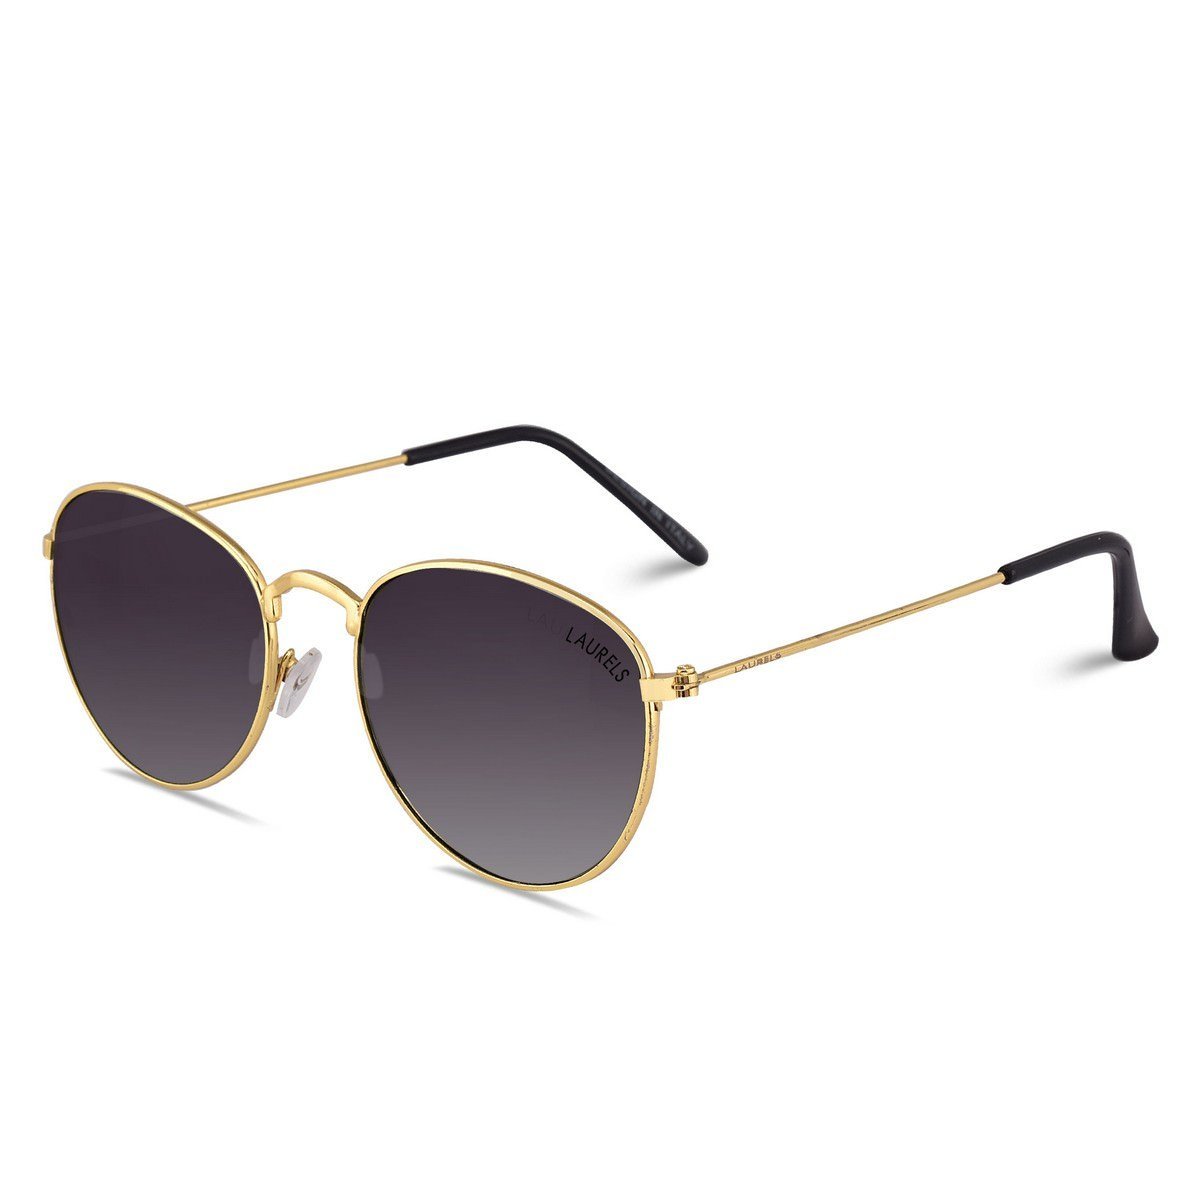 Amazon: Buy Laurels Royal UV Protected Oval Shaped Unisex Sunglasses at Rs 159 only